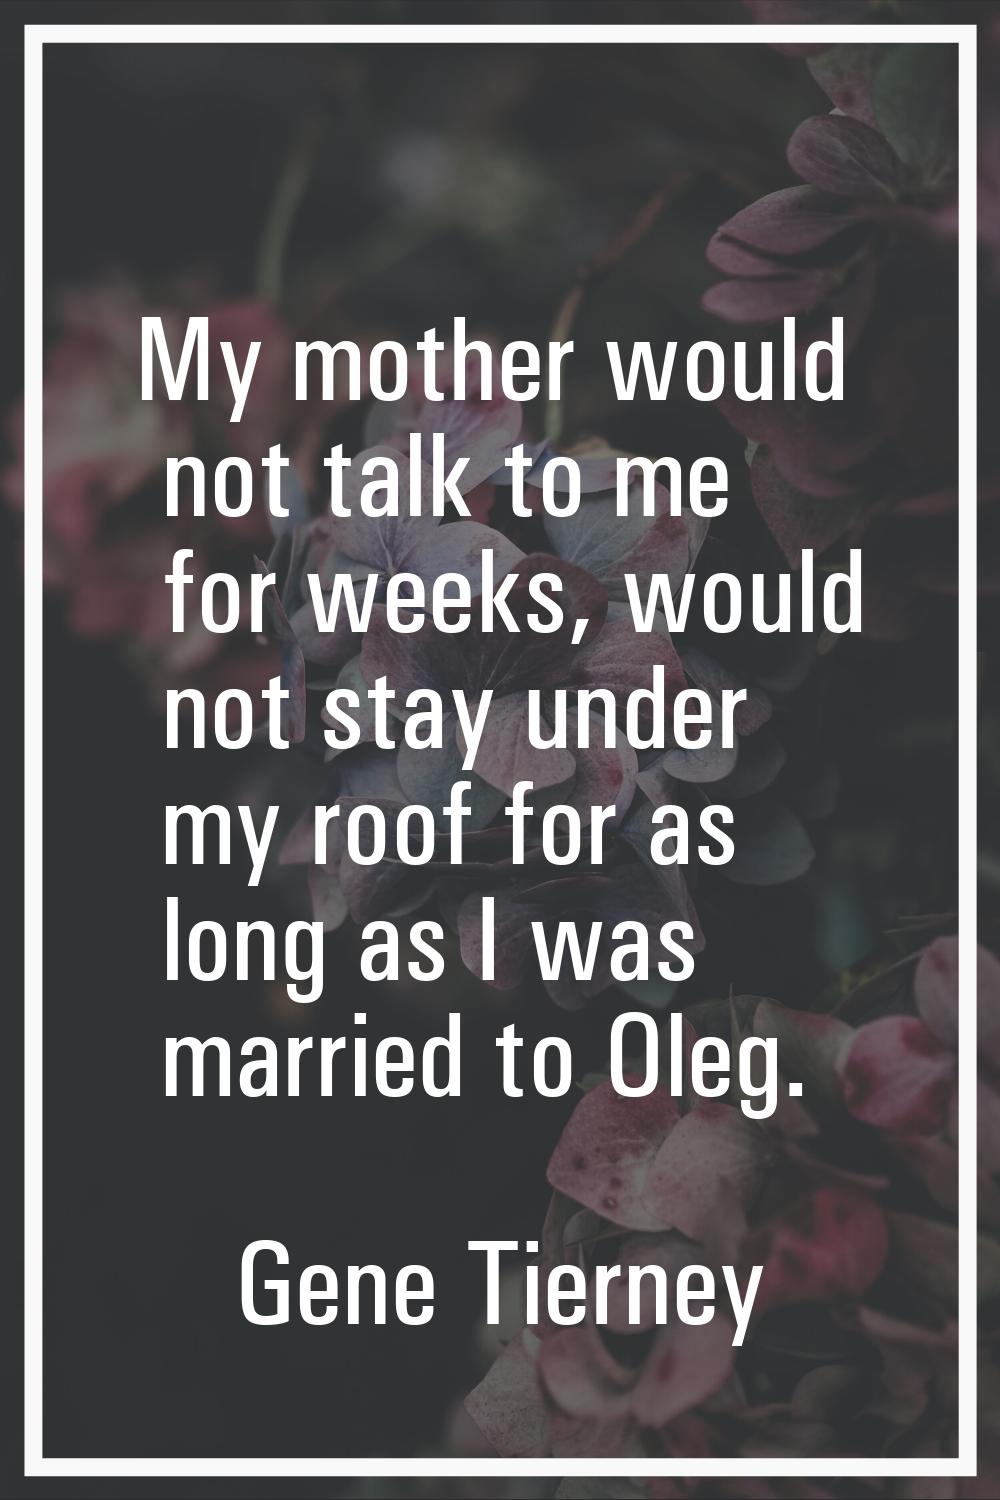 My mother would not talk to me for weeks, would not stay under my roof for as long as I was married